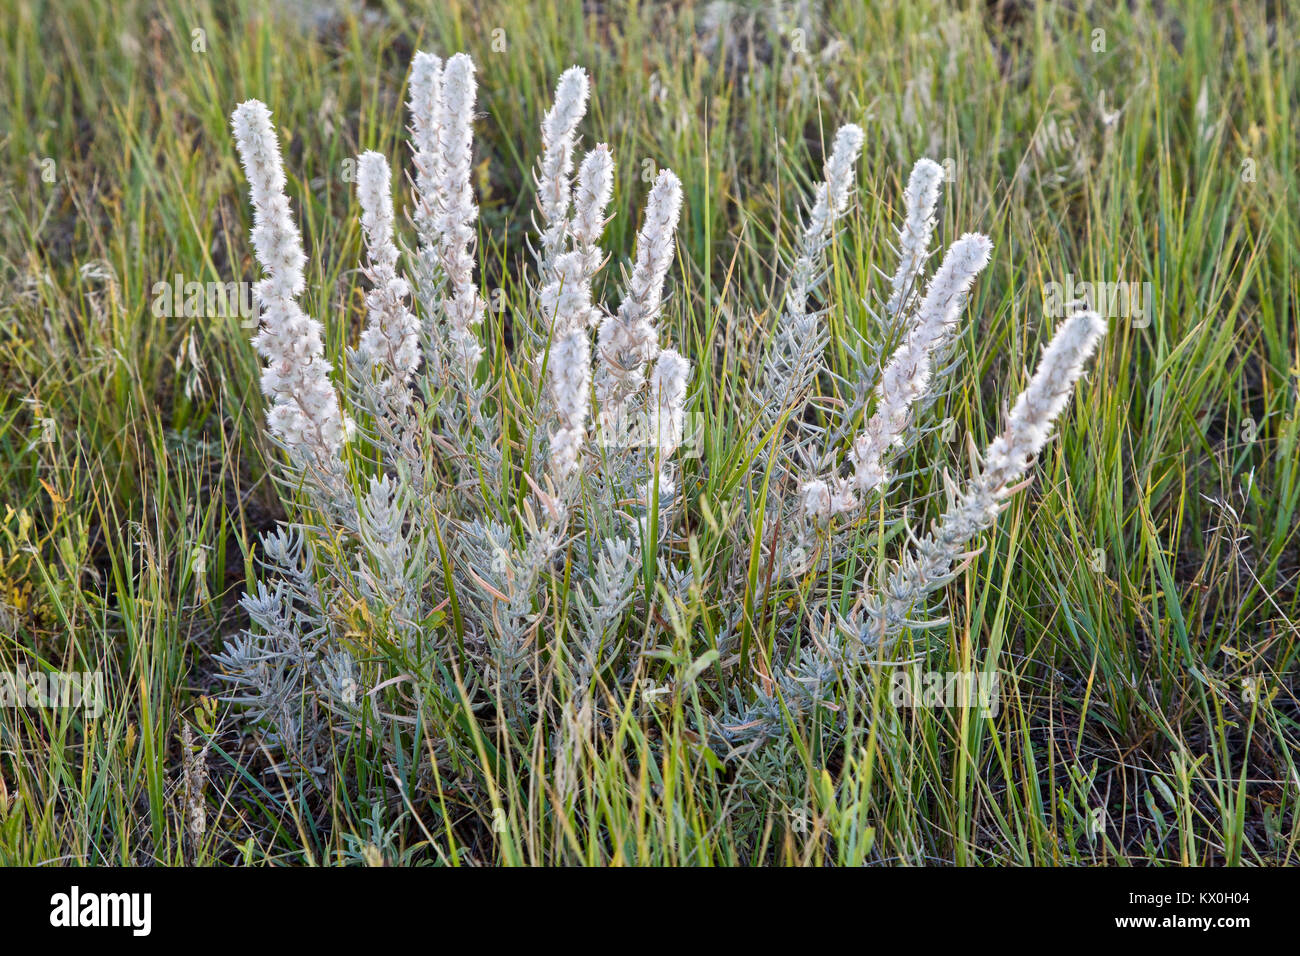 A Winterfat subshrub growing in its native habitat of the eastern Colorado short grass prairie. Stock Photo